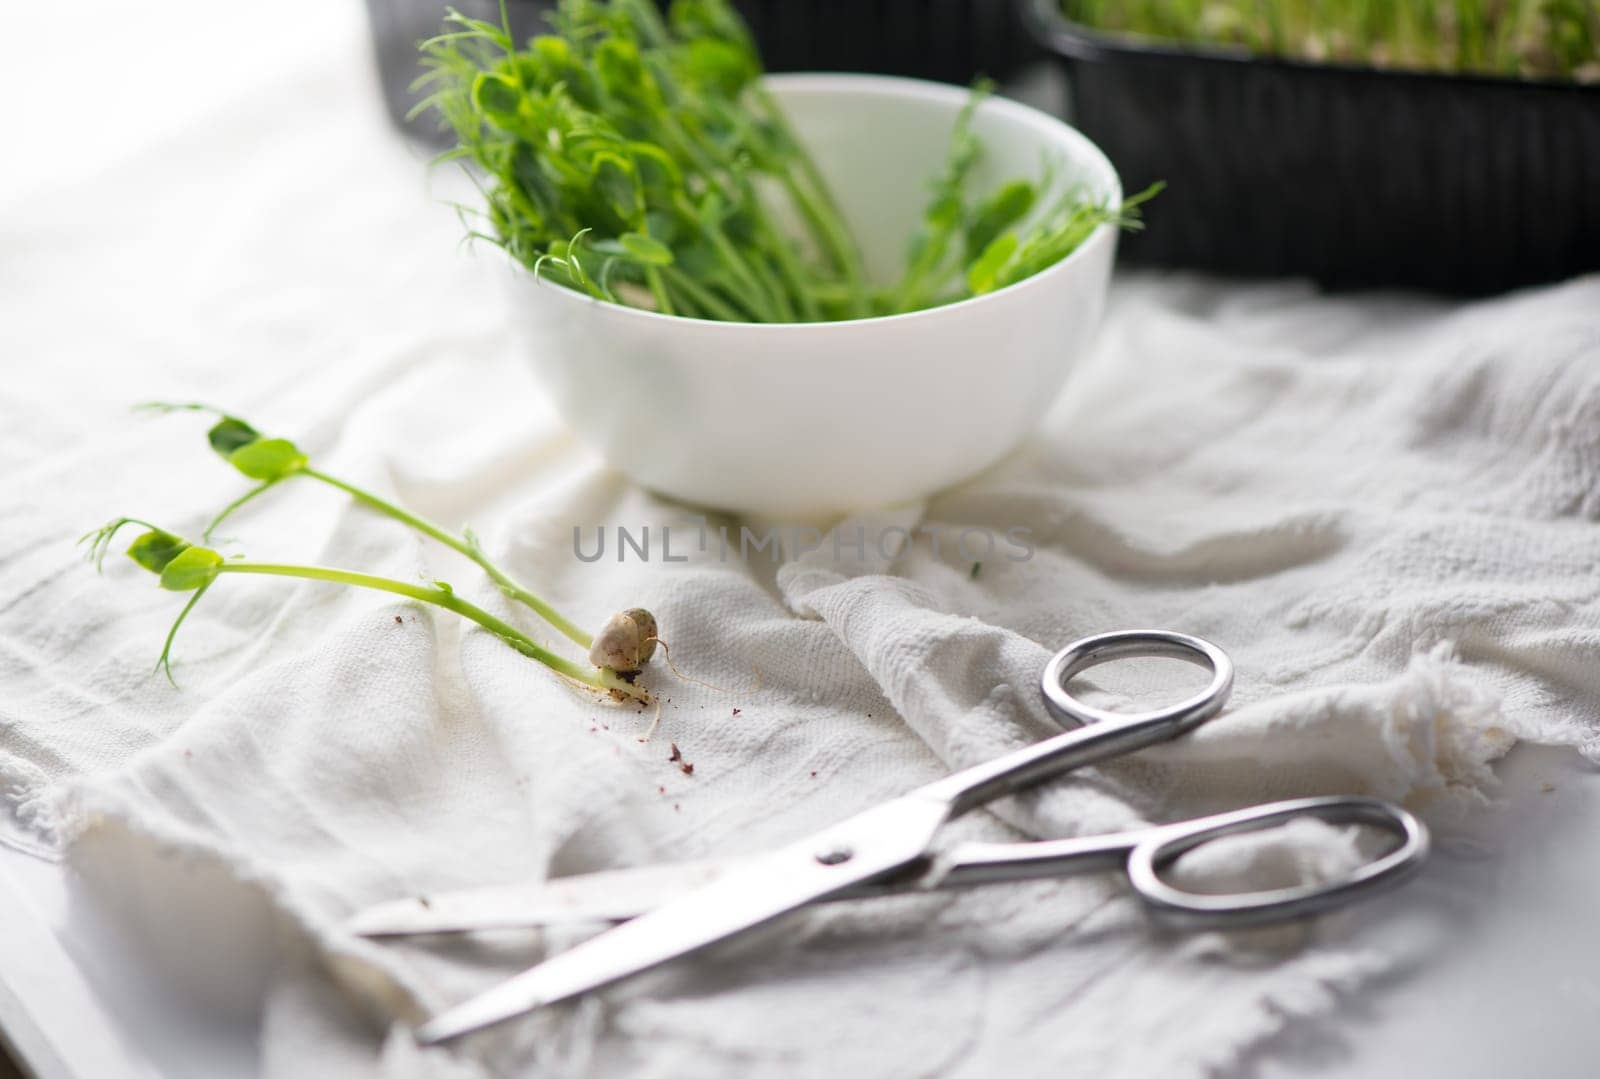 Healthy food concept, growing microgreens - boxes of peas scissors and a bowl of cut microgreens by aprilphoto